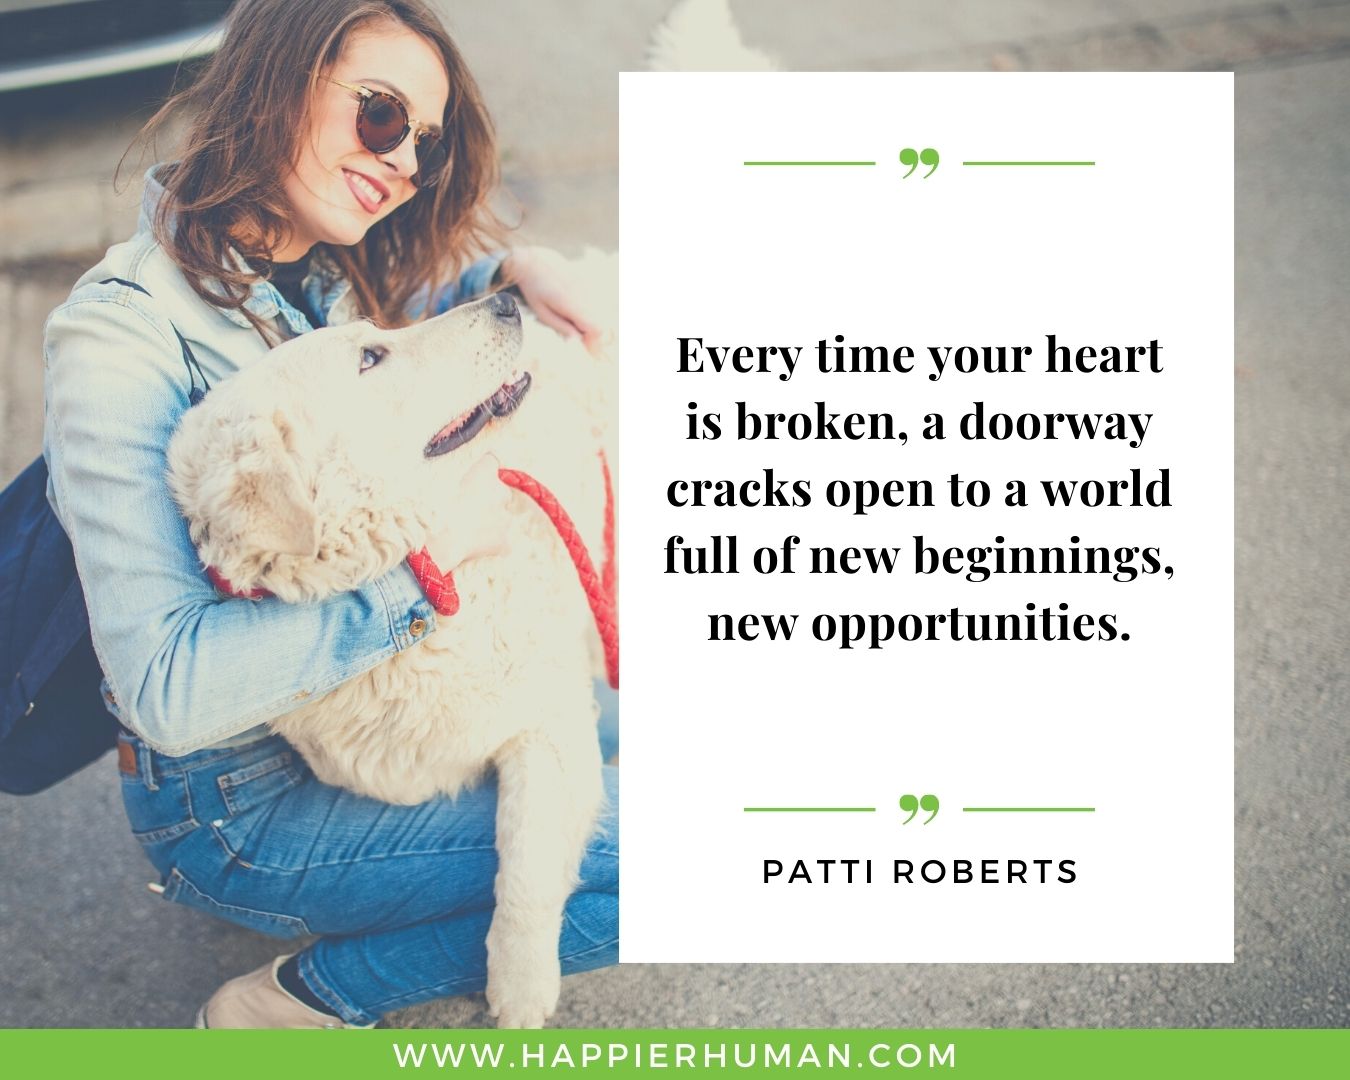 Broken Trust Quotes - “Every time your heart is broken, a doorway cracks open to a world full of new beginnings, new opportunities.” - Patti Roberts